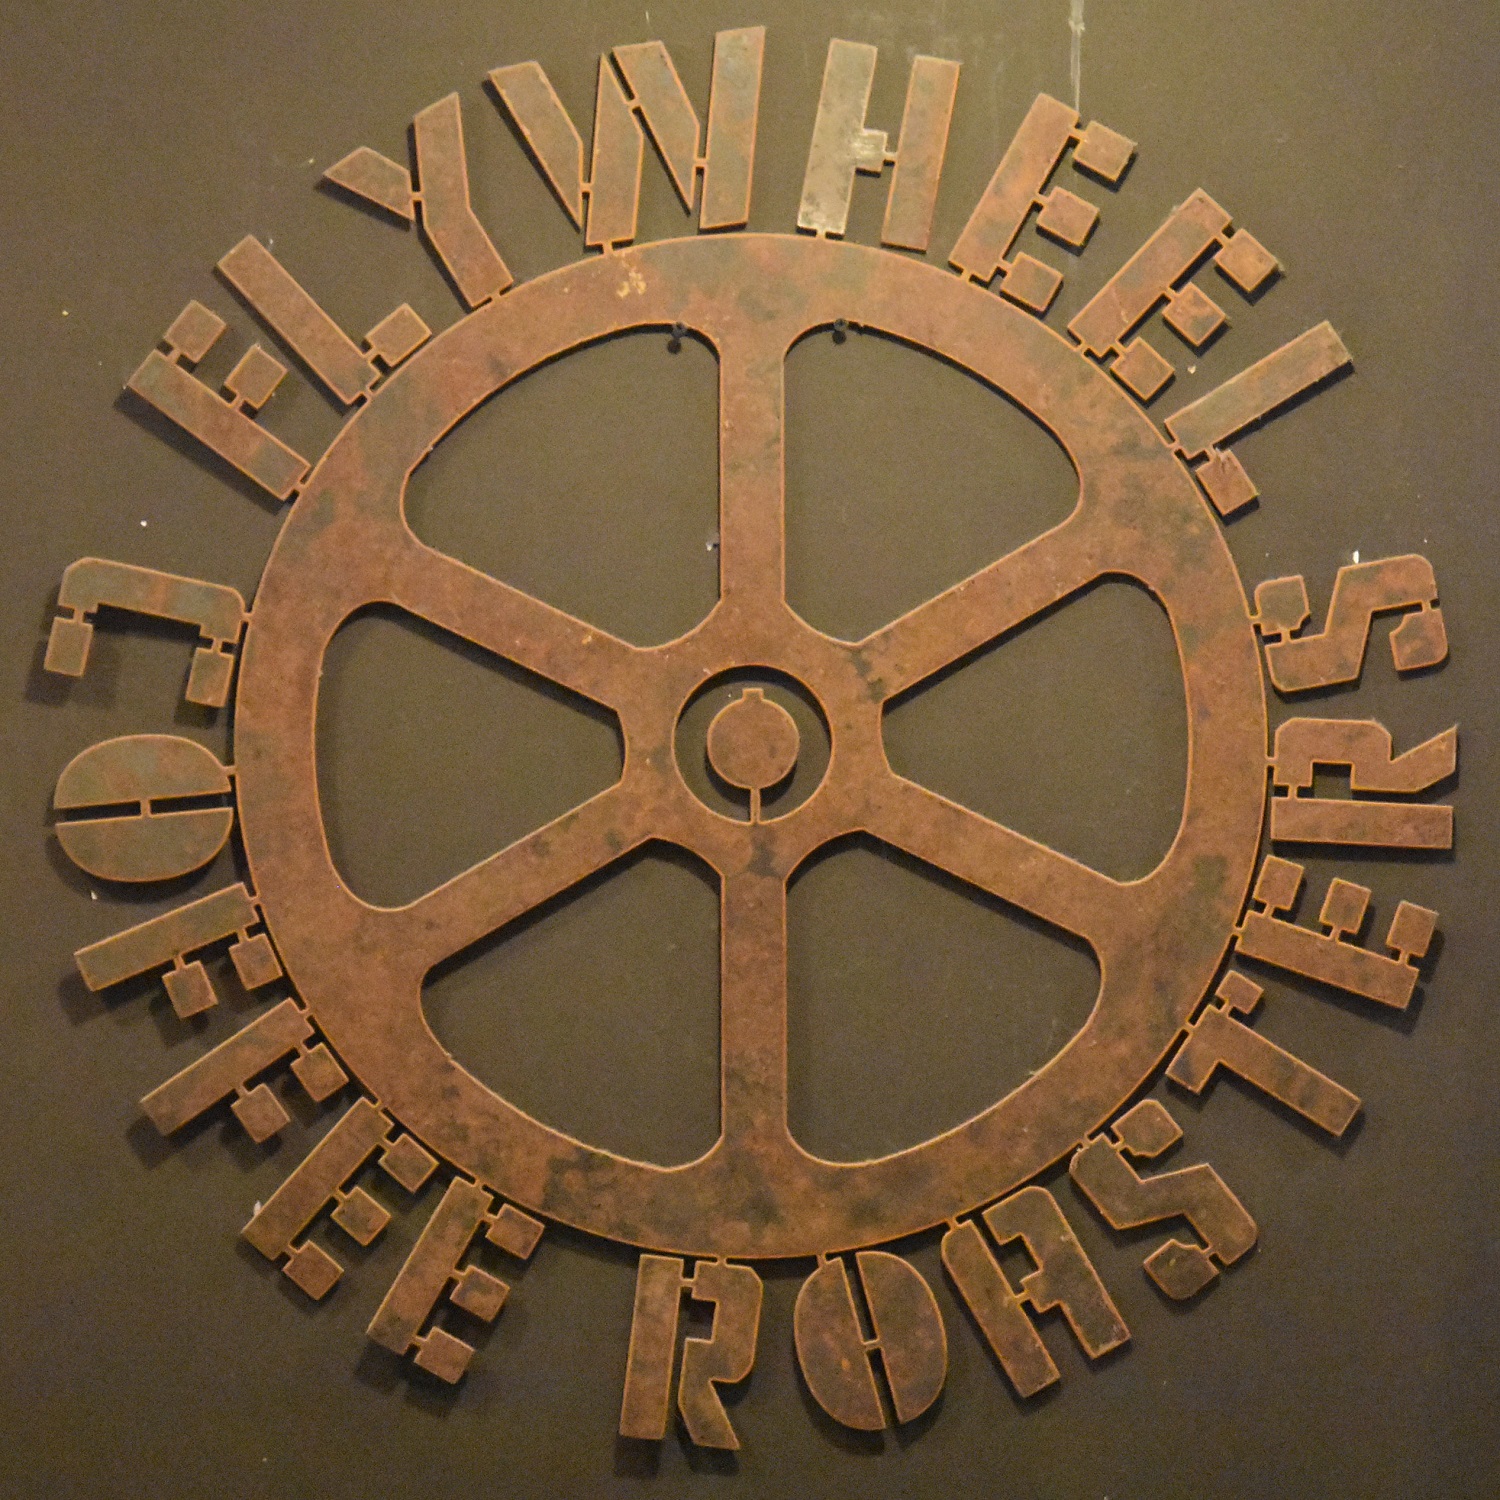 The Flywheel Coffee Roasters logo from the wall of the coffee shop in San Francisco.